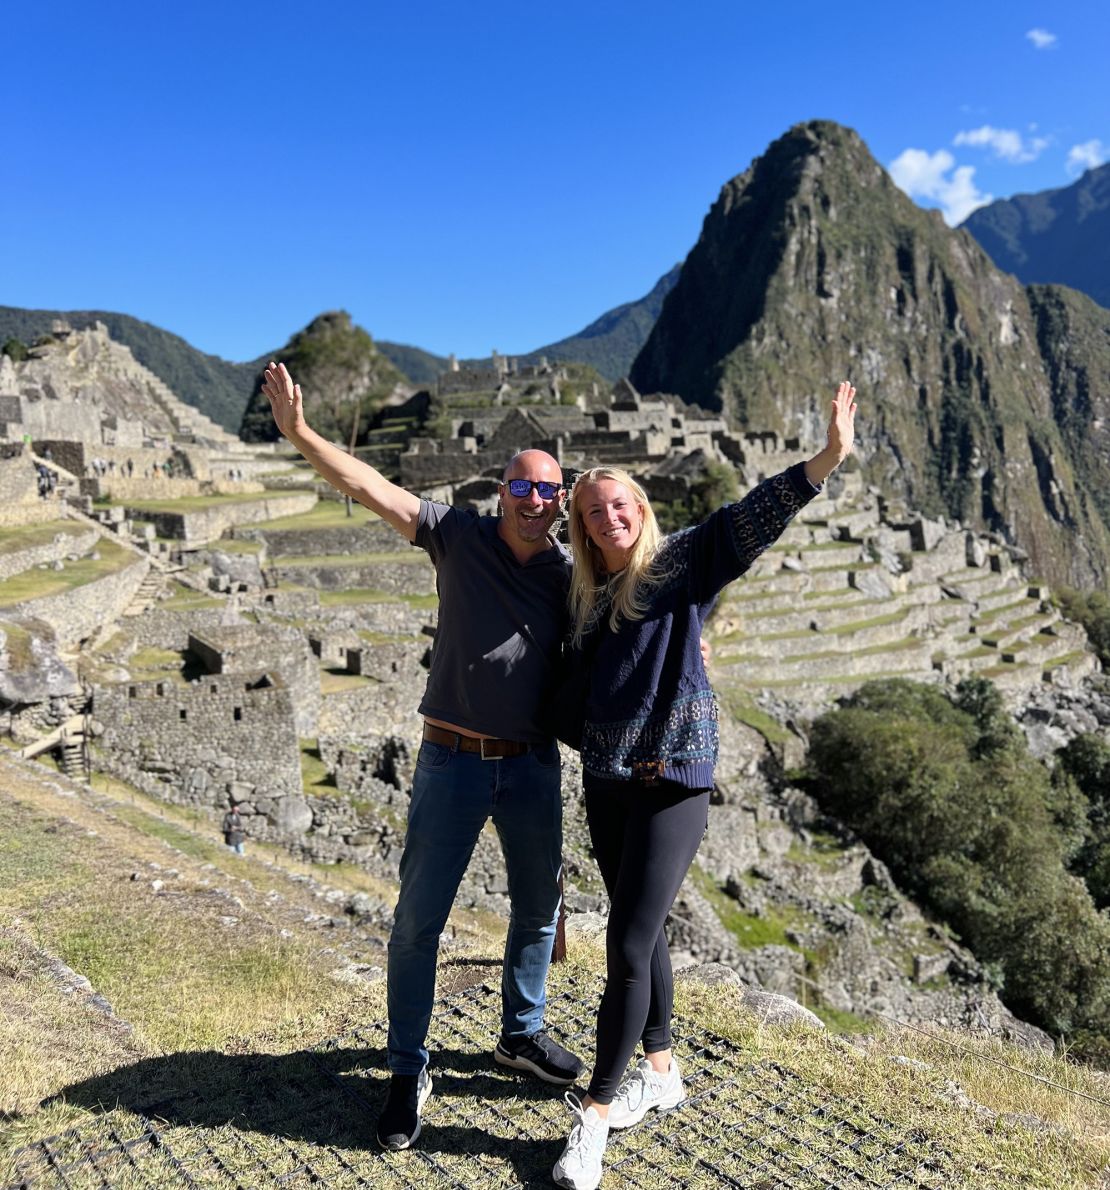 A perk of Jasmijn and Jorrit's job is they get to explore the world together. Here they are pictured at Machu Picchu, Peru.